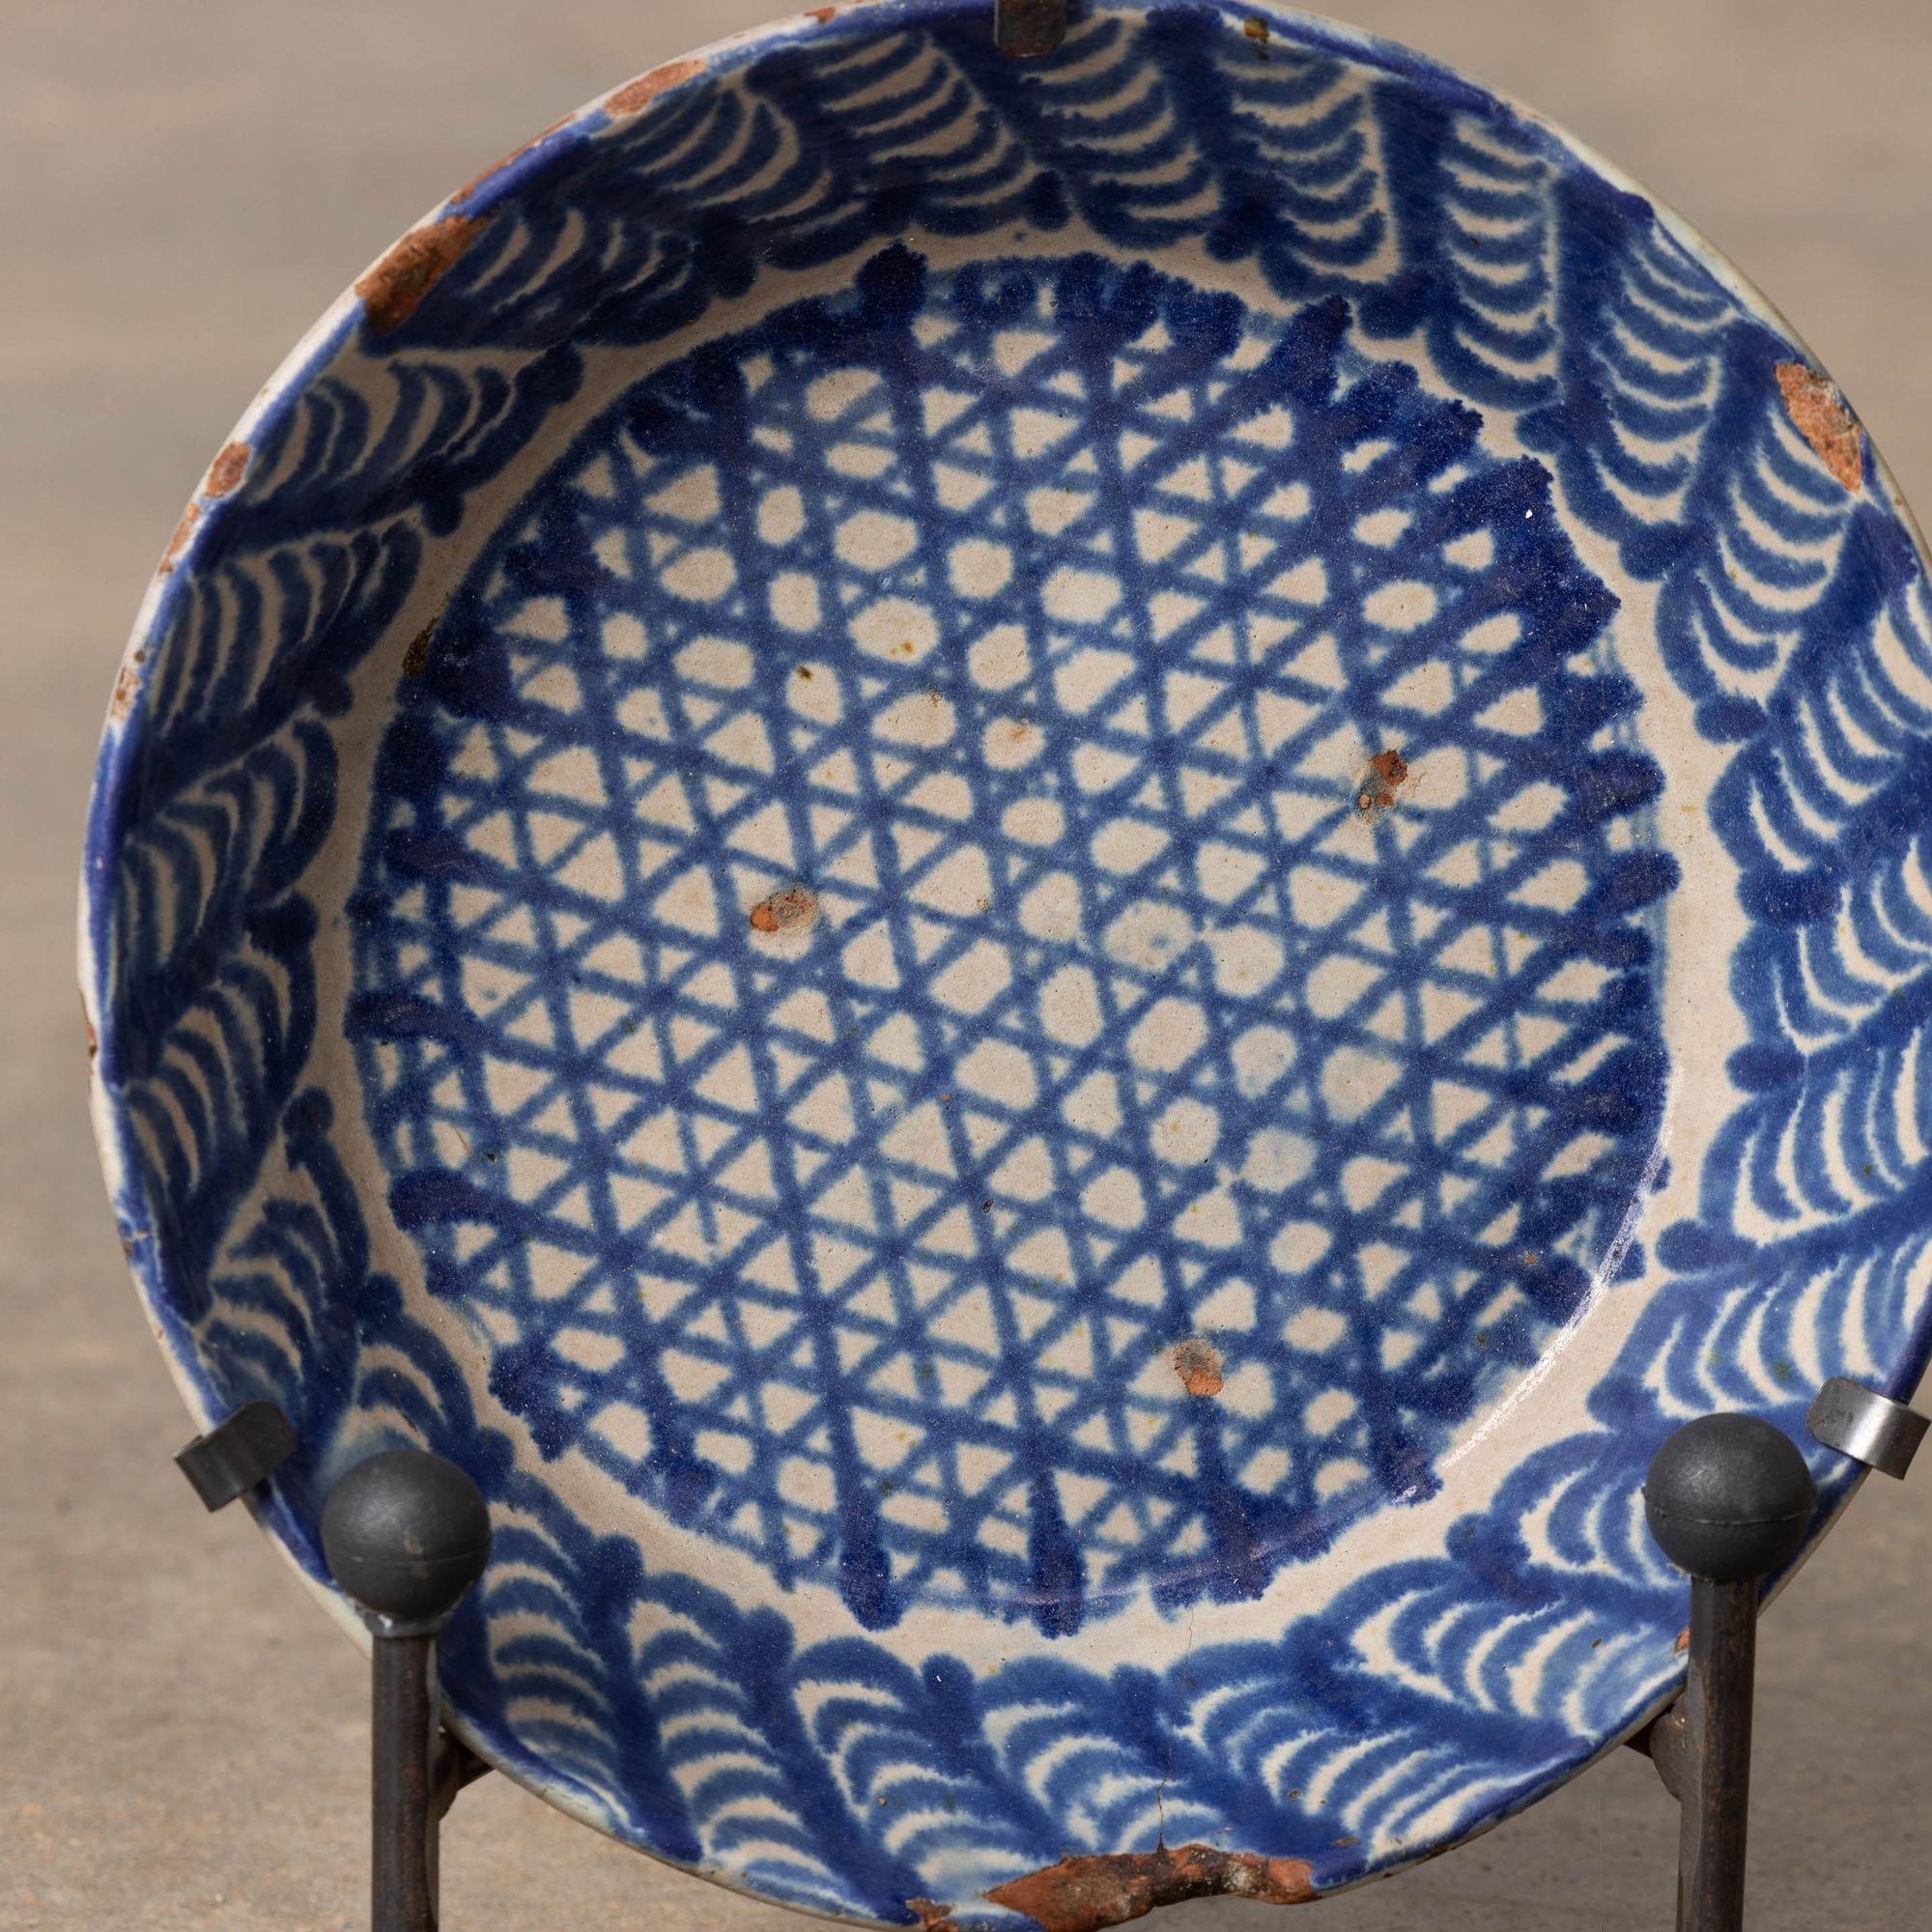 Hand-Painted 19th c. Spanish Blue and White Fajalauza Lebrillo Bowl from Granada For Sale